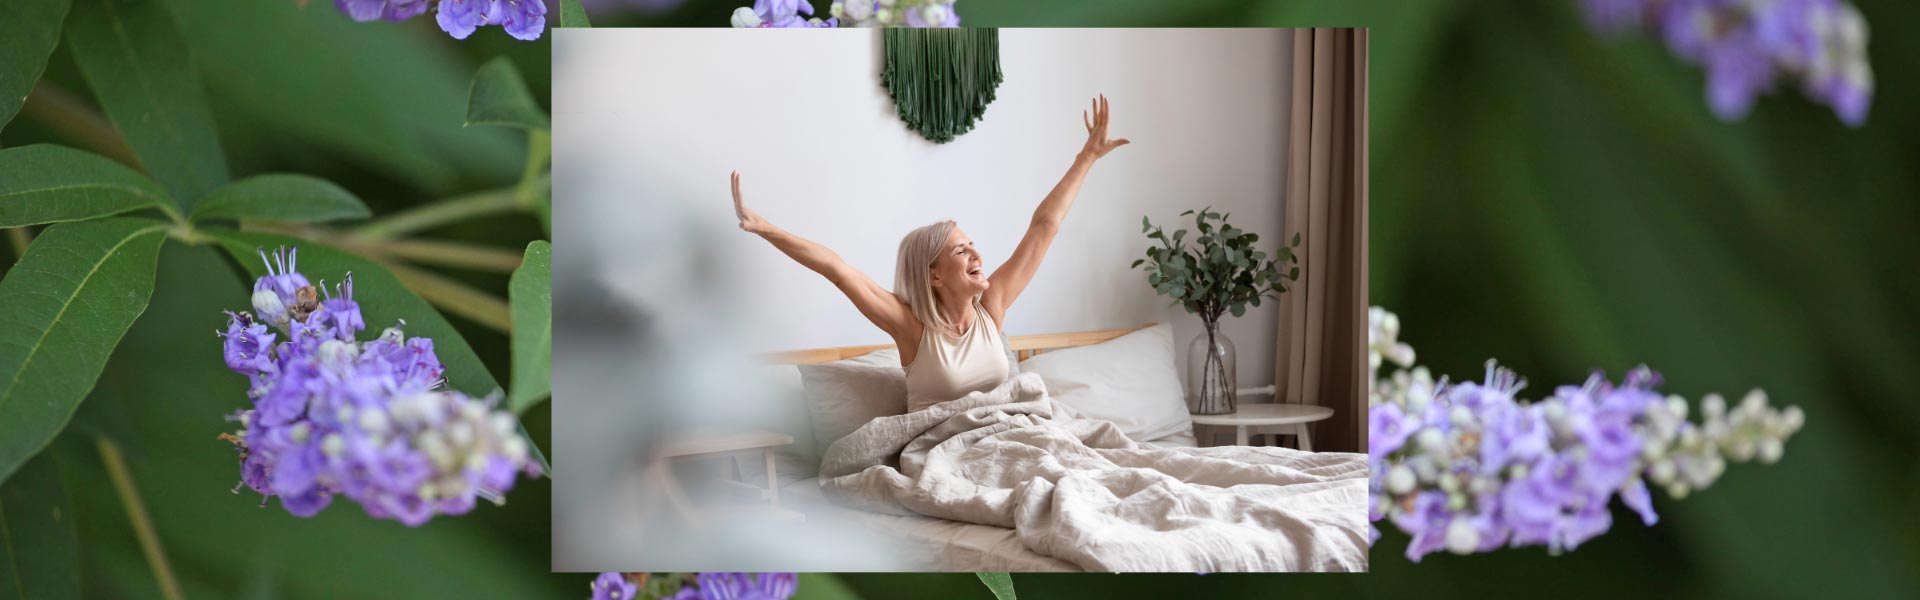 A middle-aged woman waking up feeling happy and refreshed